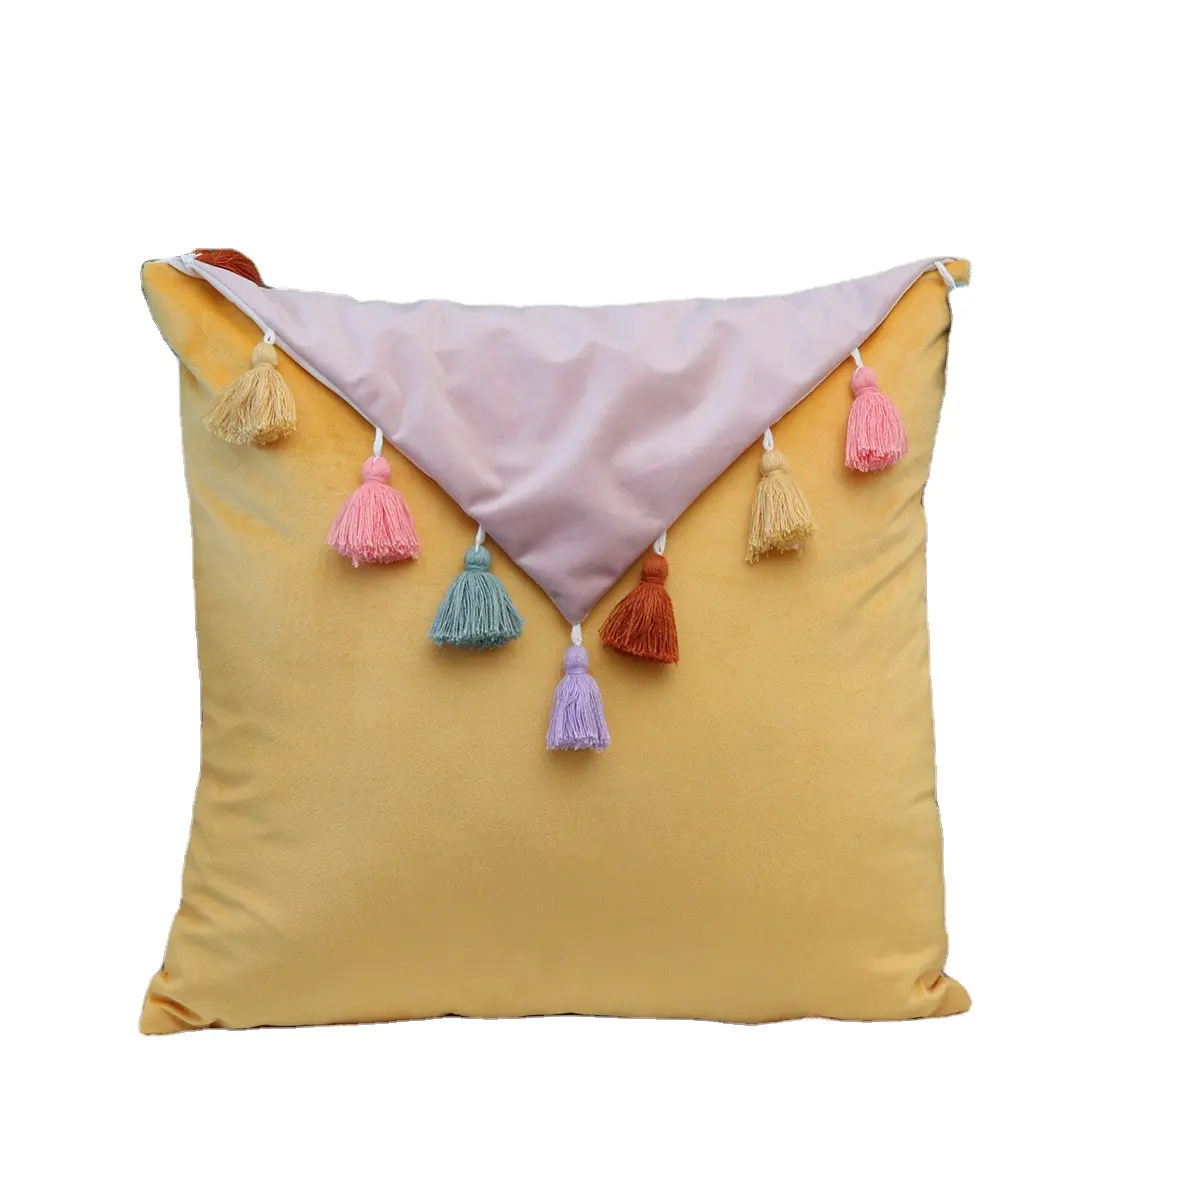 Contrast velvet Pillow Covers with multi colours Tassels 18x18 inch Square Patterned Cushion Cases knife edge